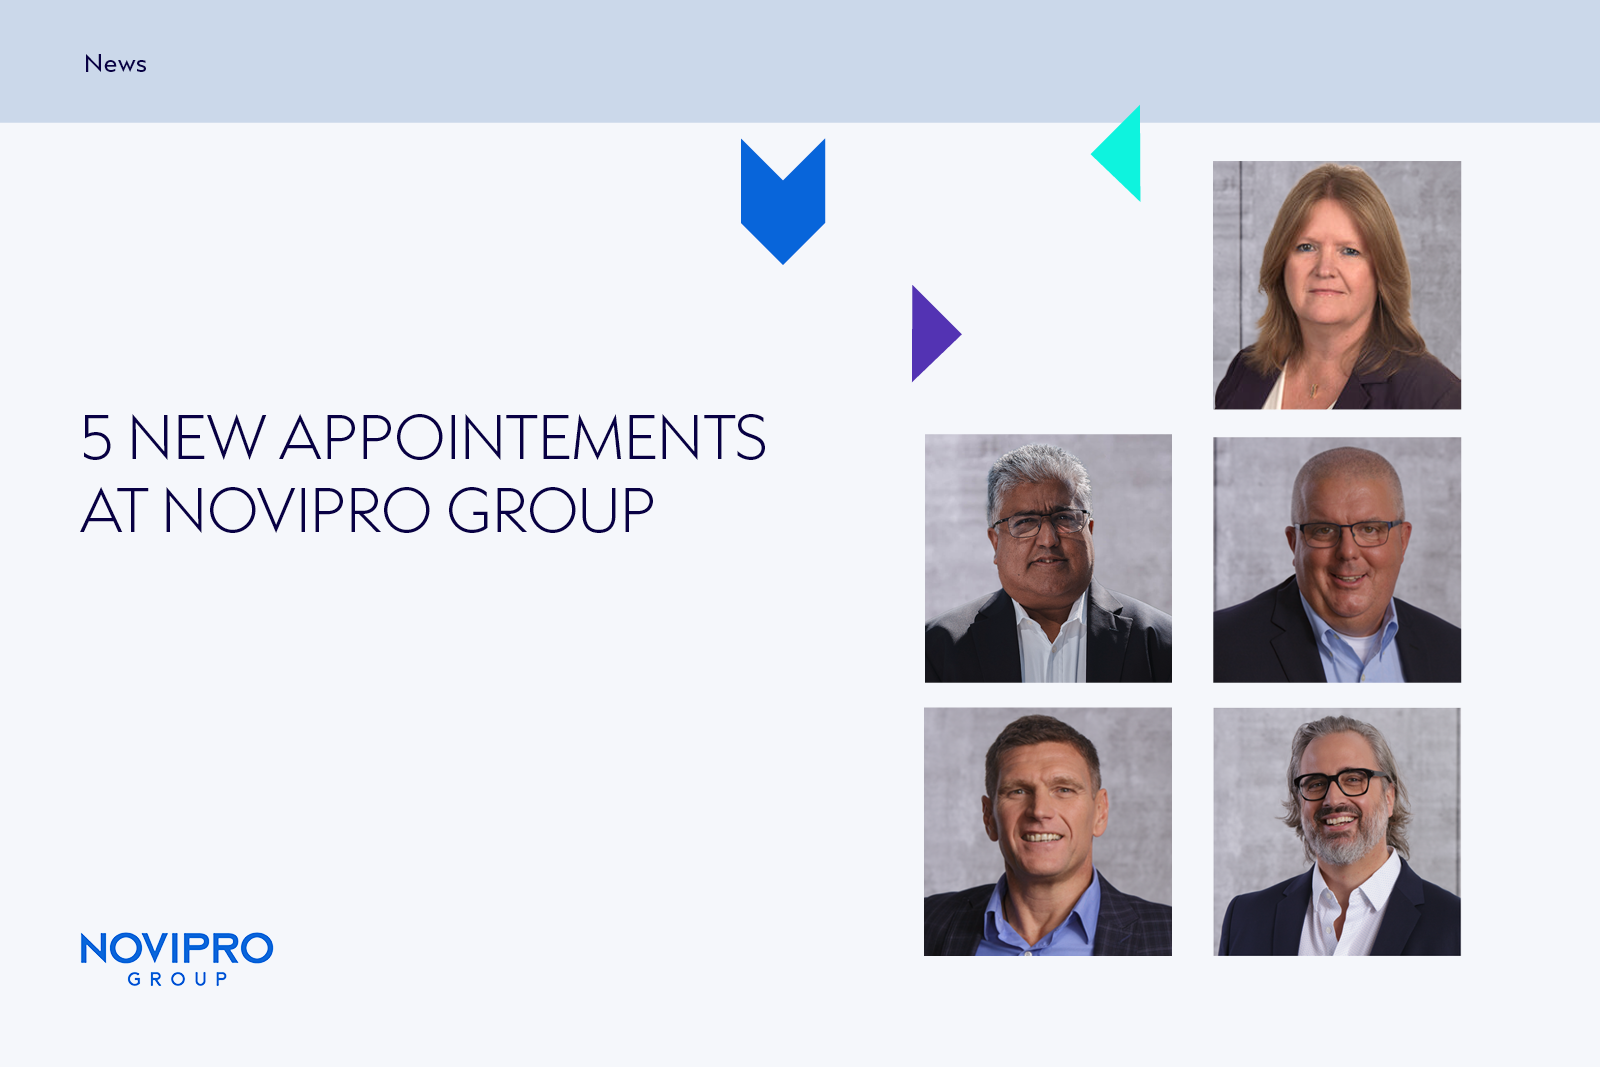 5 New Appointements at NOVIPRO Group